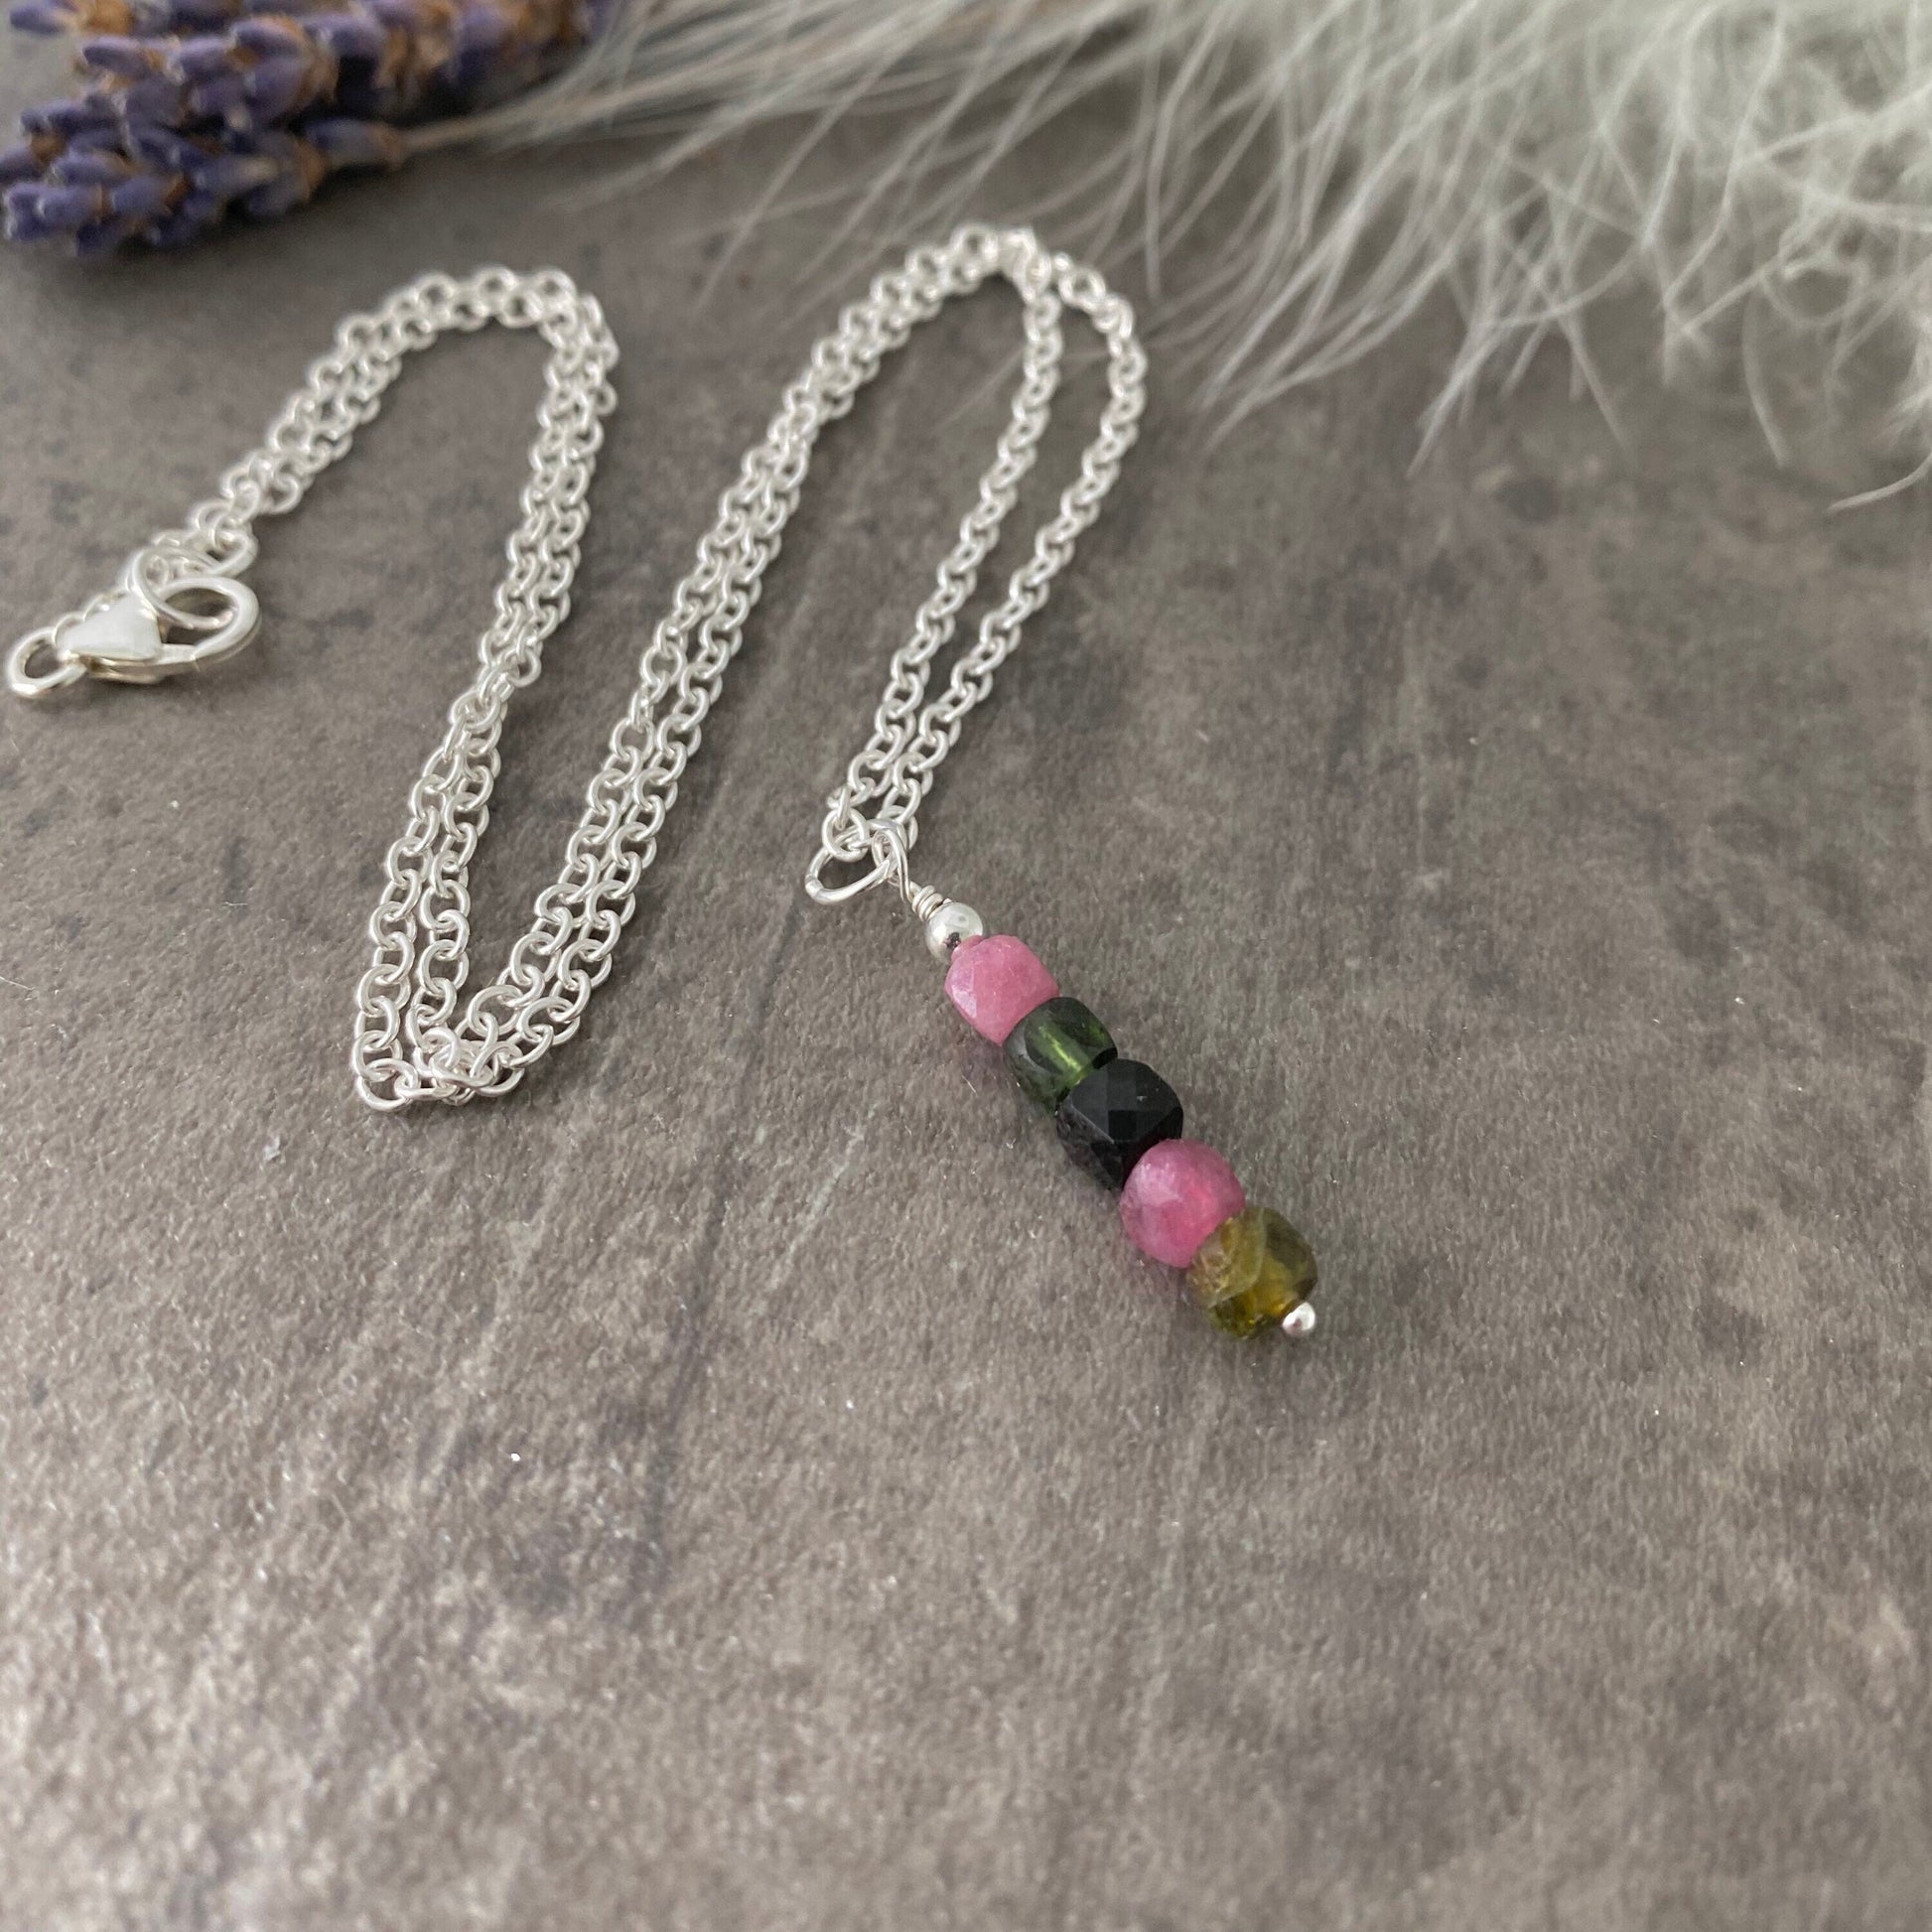 Dainty Tourmaline necklace, October birthstone, sterling silver faceted pendant gemstone necklace